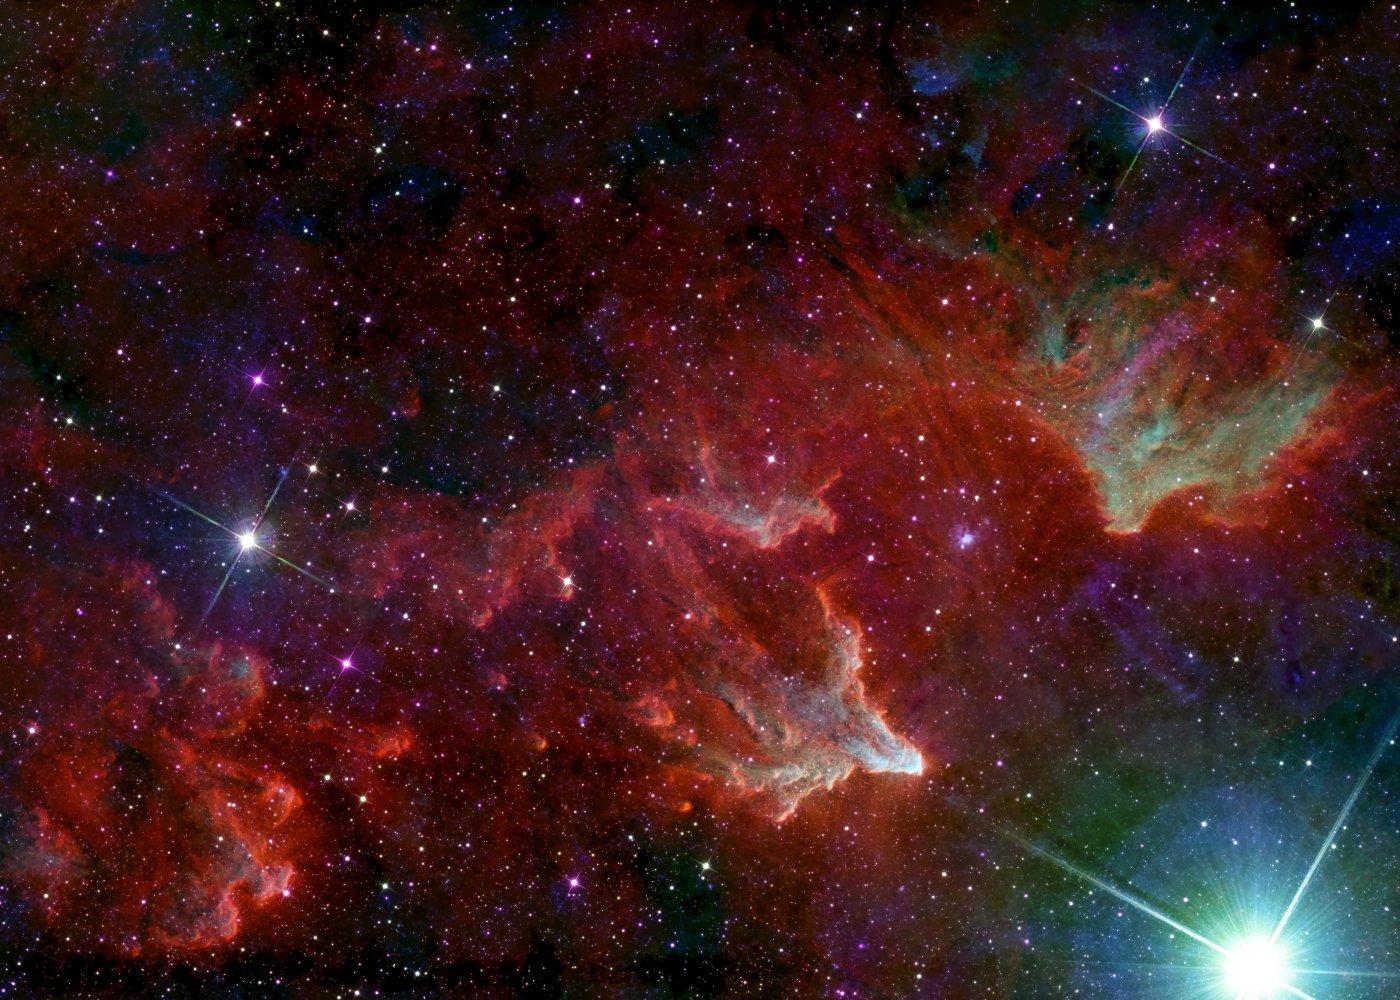 SH2-185 (gam Cas Nebula, Ghost of Cassiopeia) in H-alpha, blue and near infrared